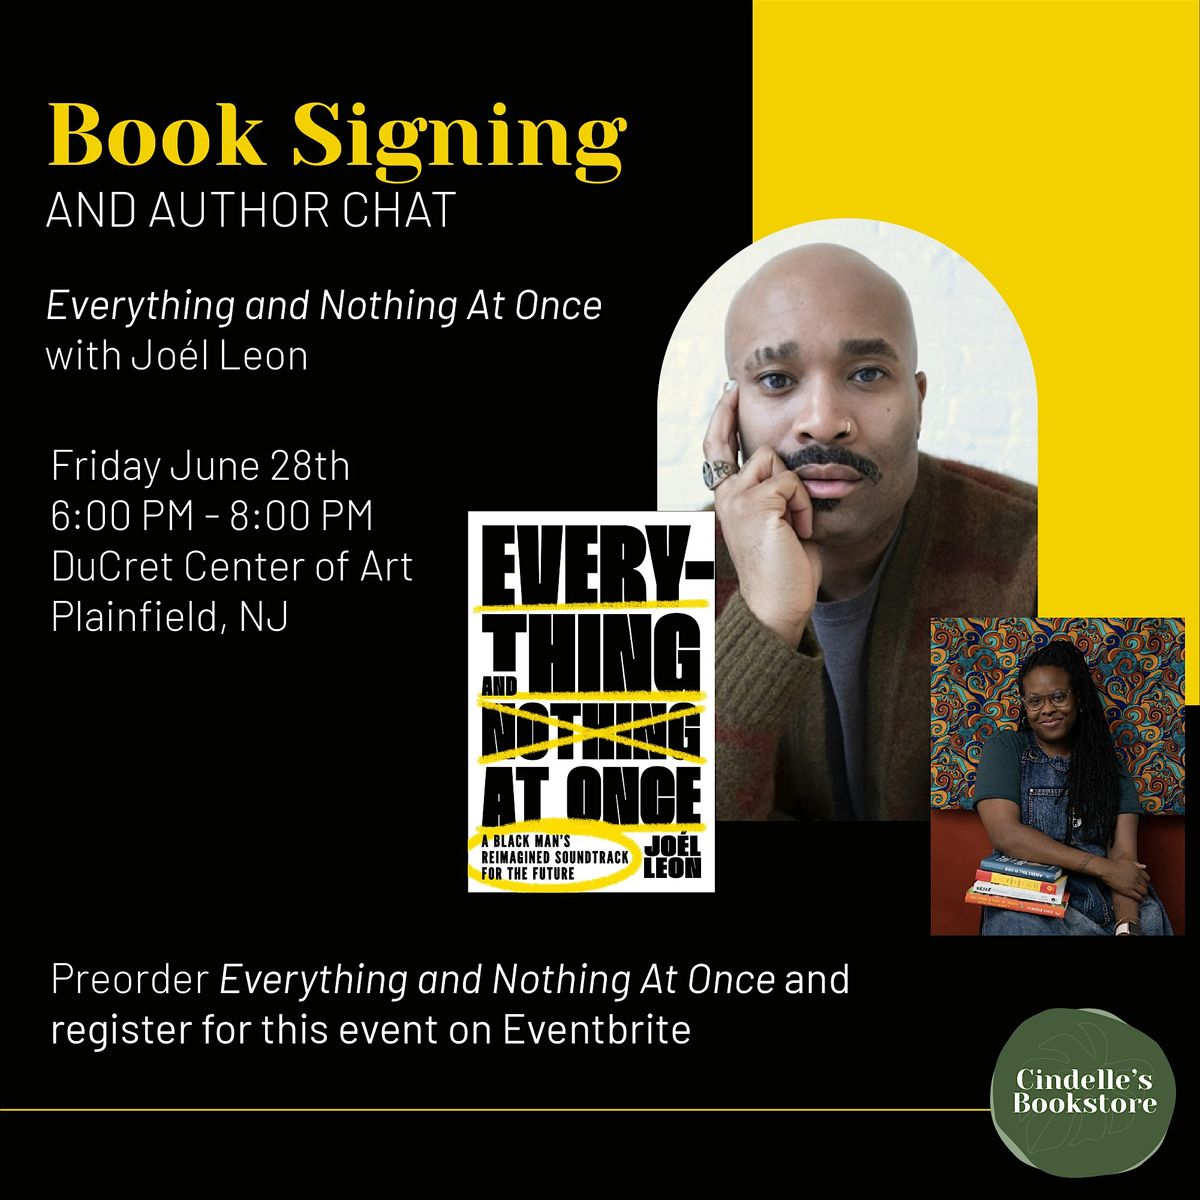 Book Signing and Author Chat: Everything and Nothing at Once with Joel Leo